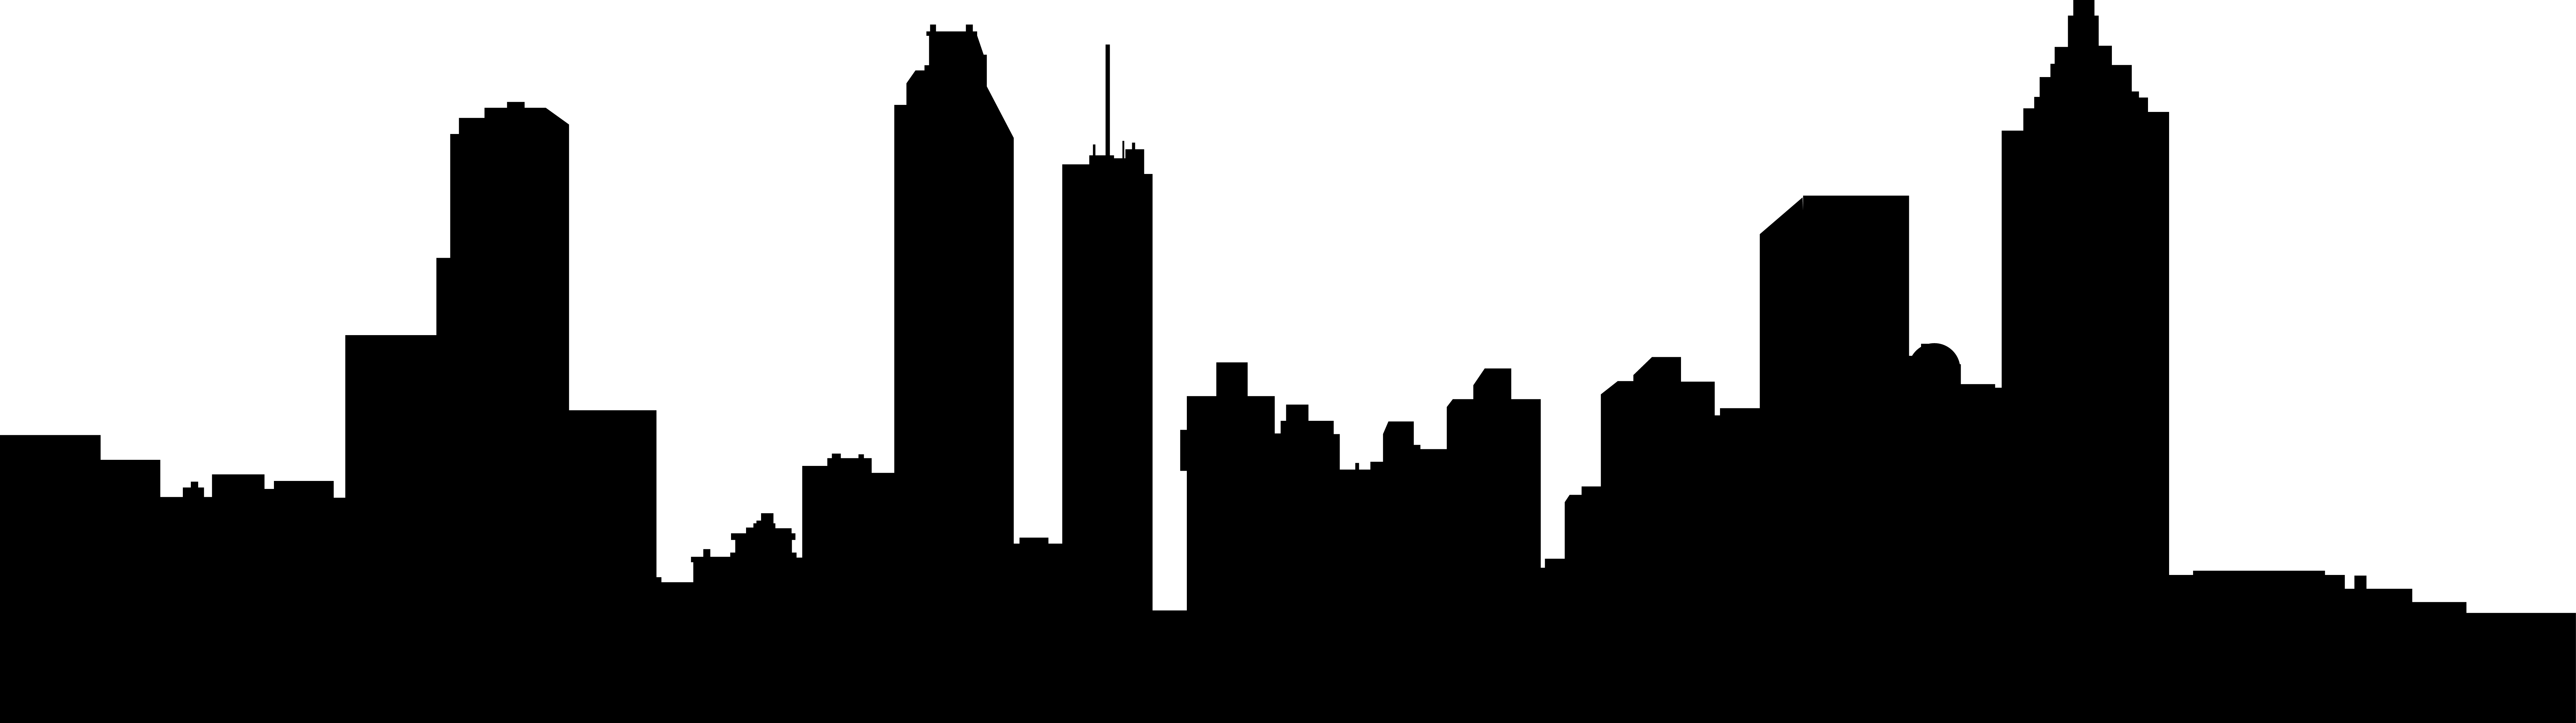 Chicago Skyline Line Drawing - Chicago Skyline Outline Drawing ...